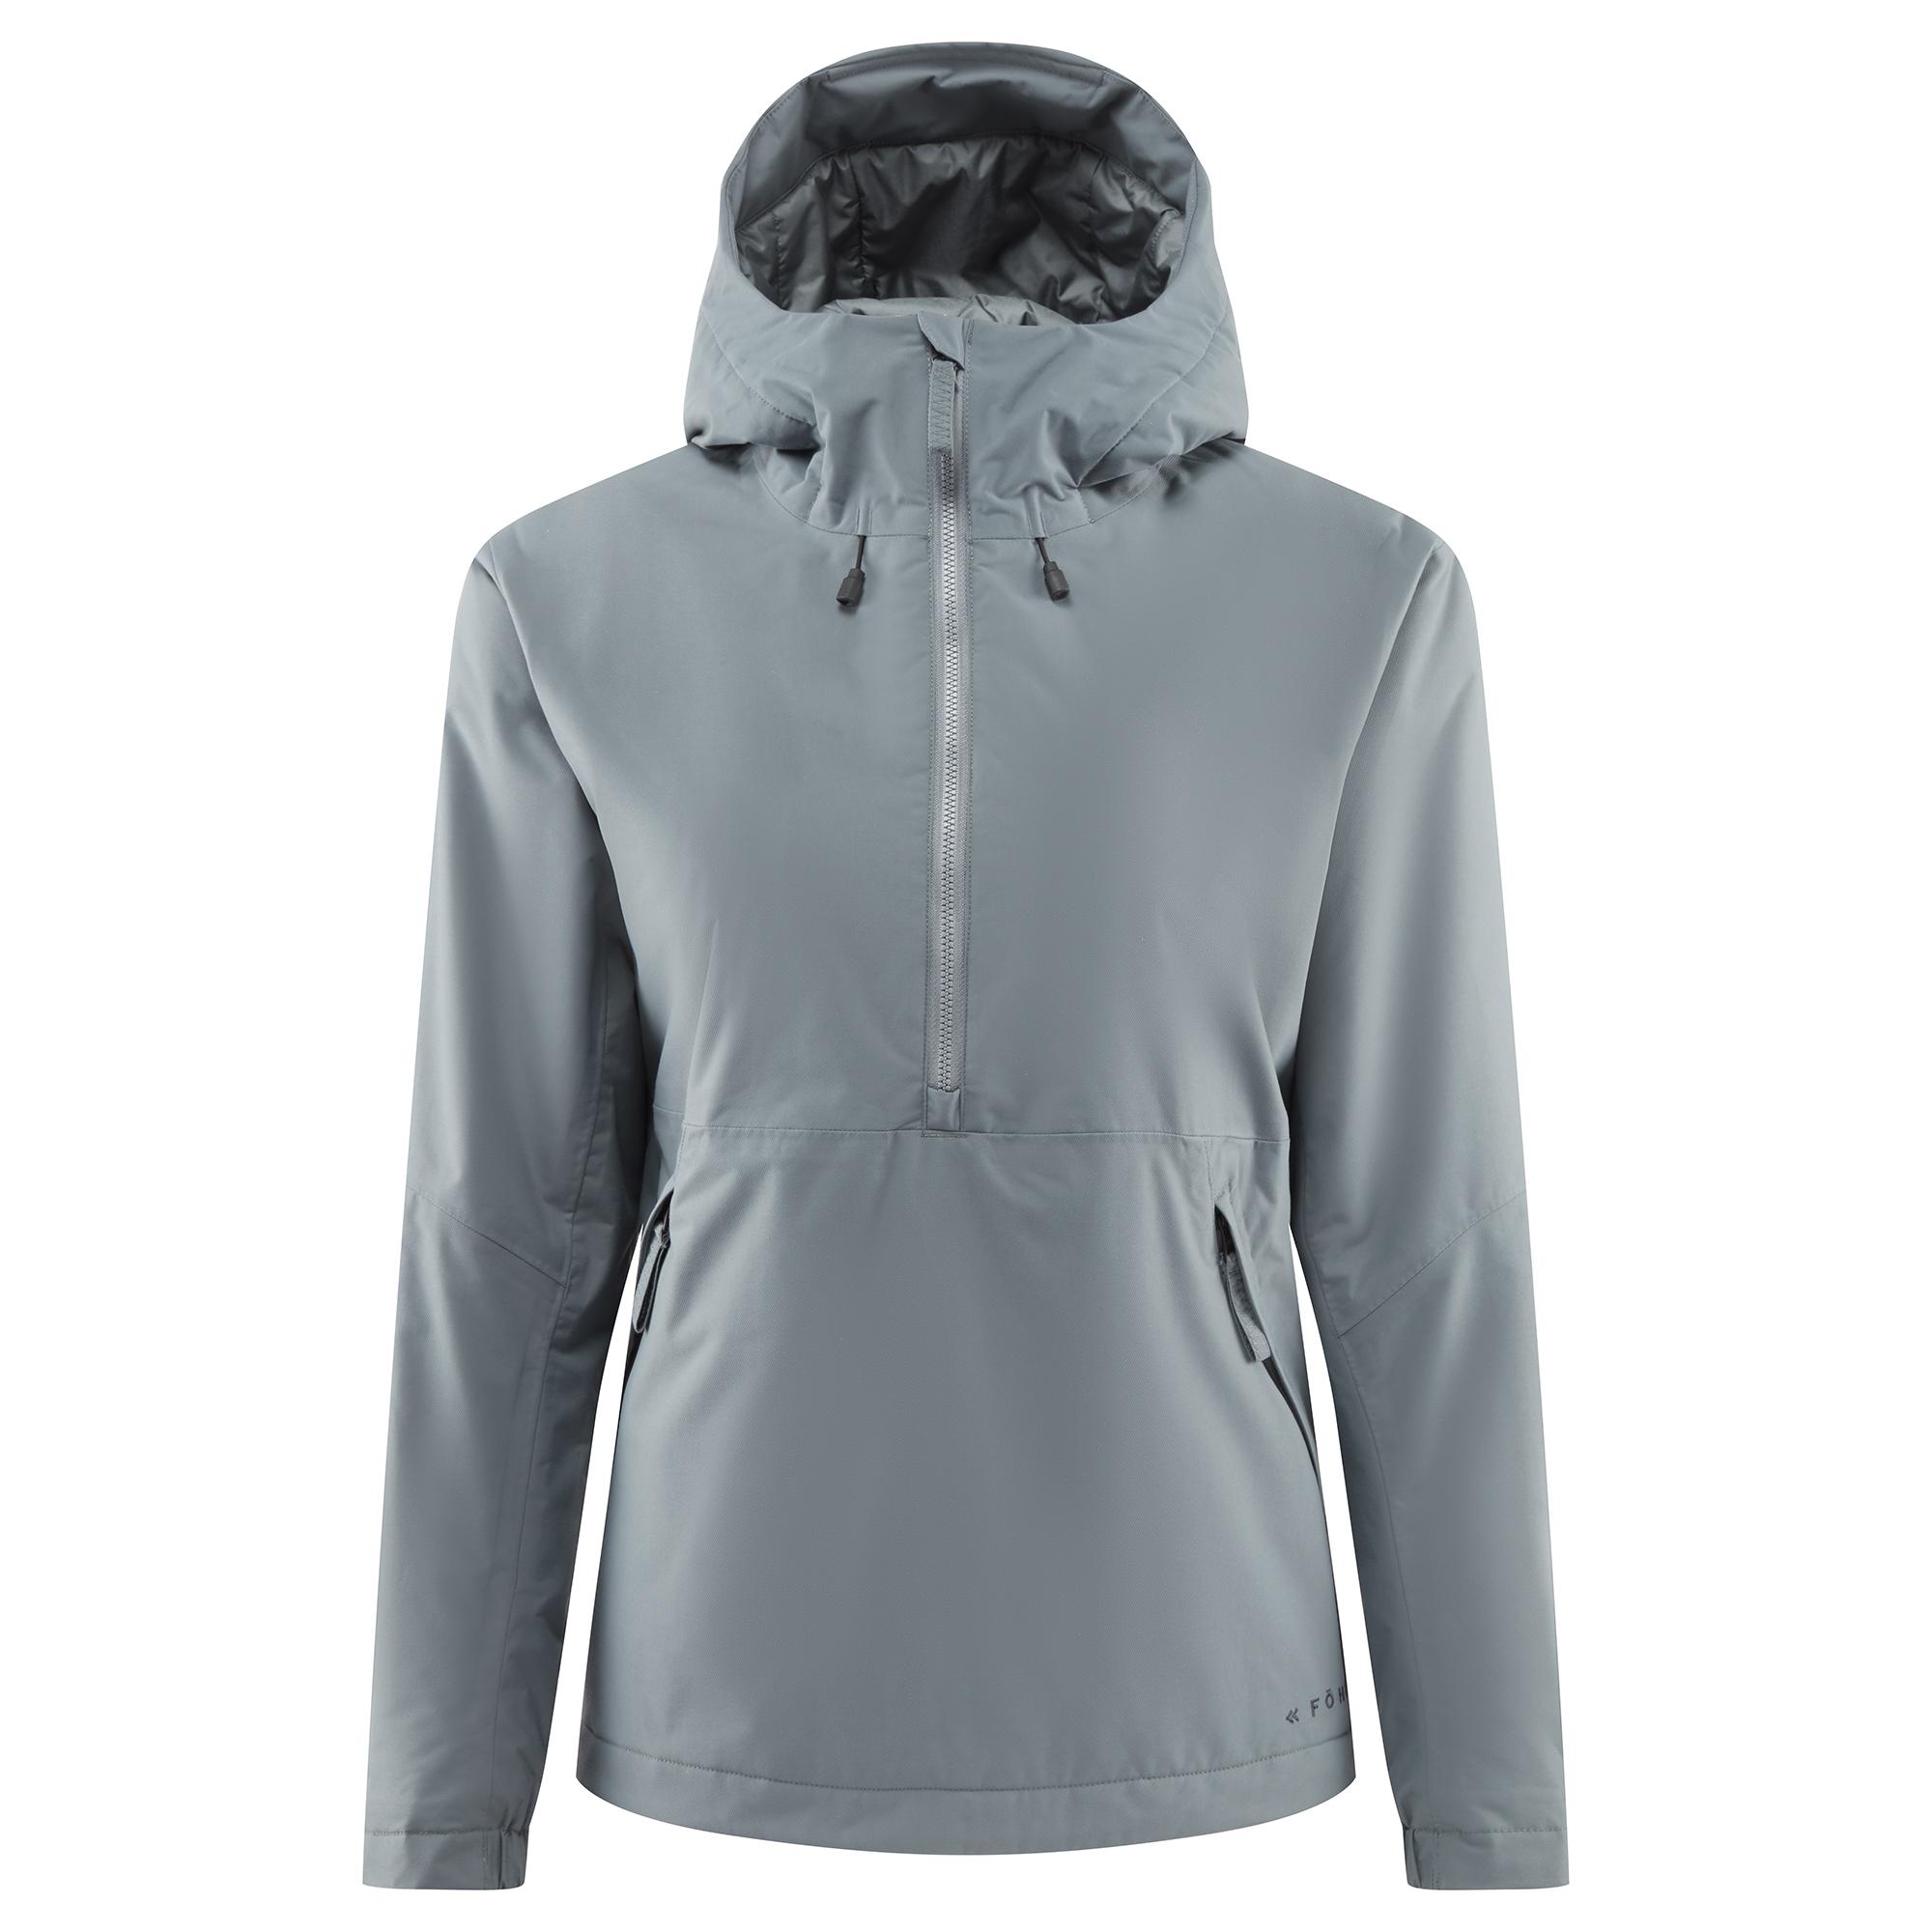 Fhn Womens Insulated Smock - Stormy Weather